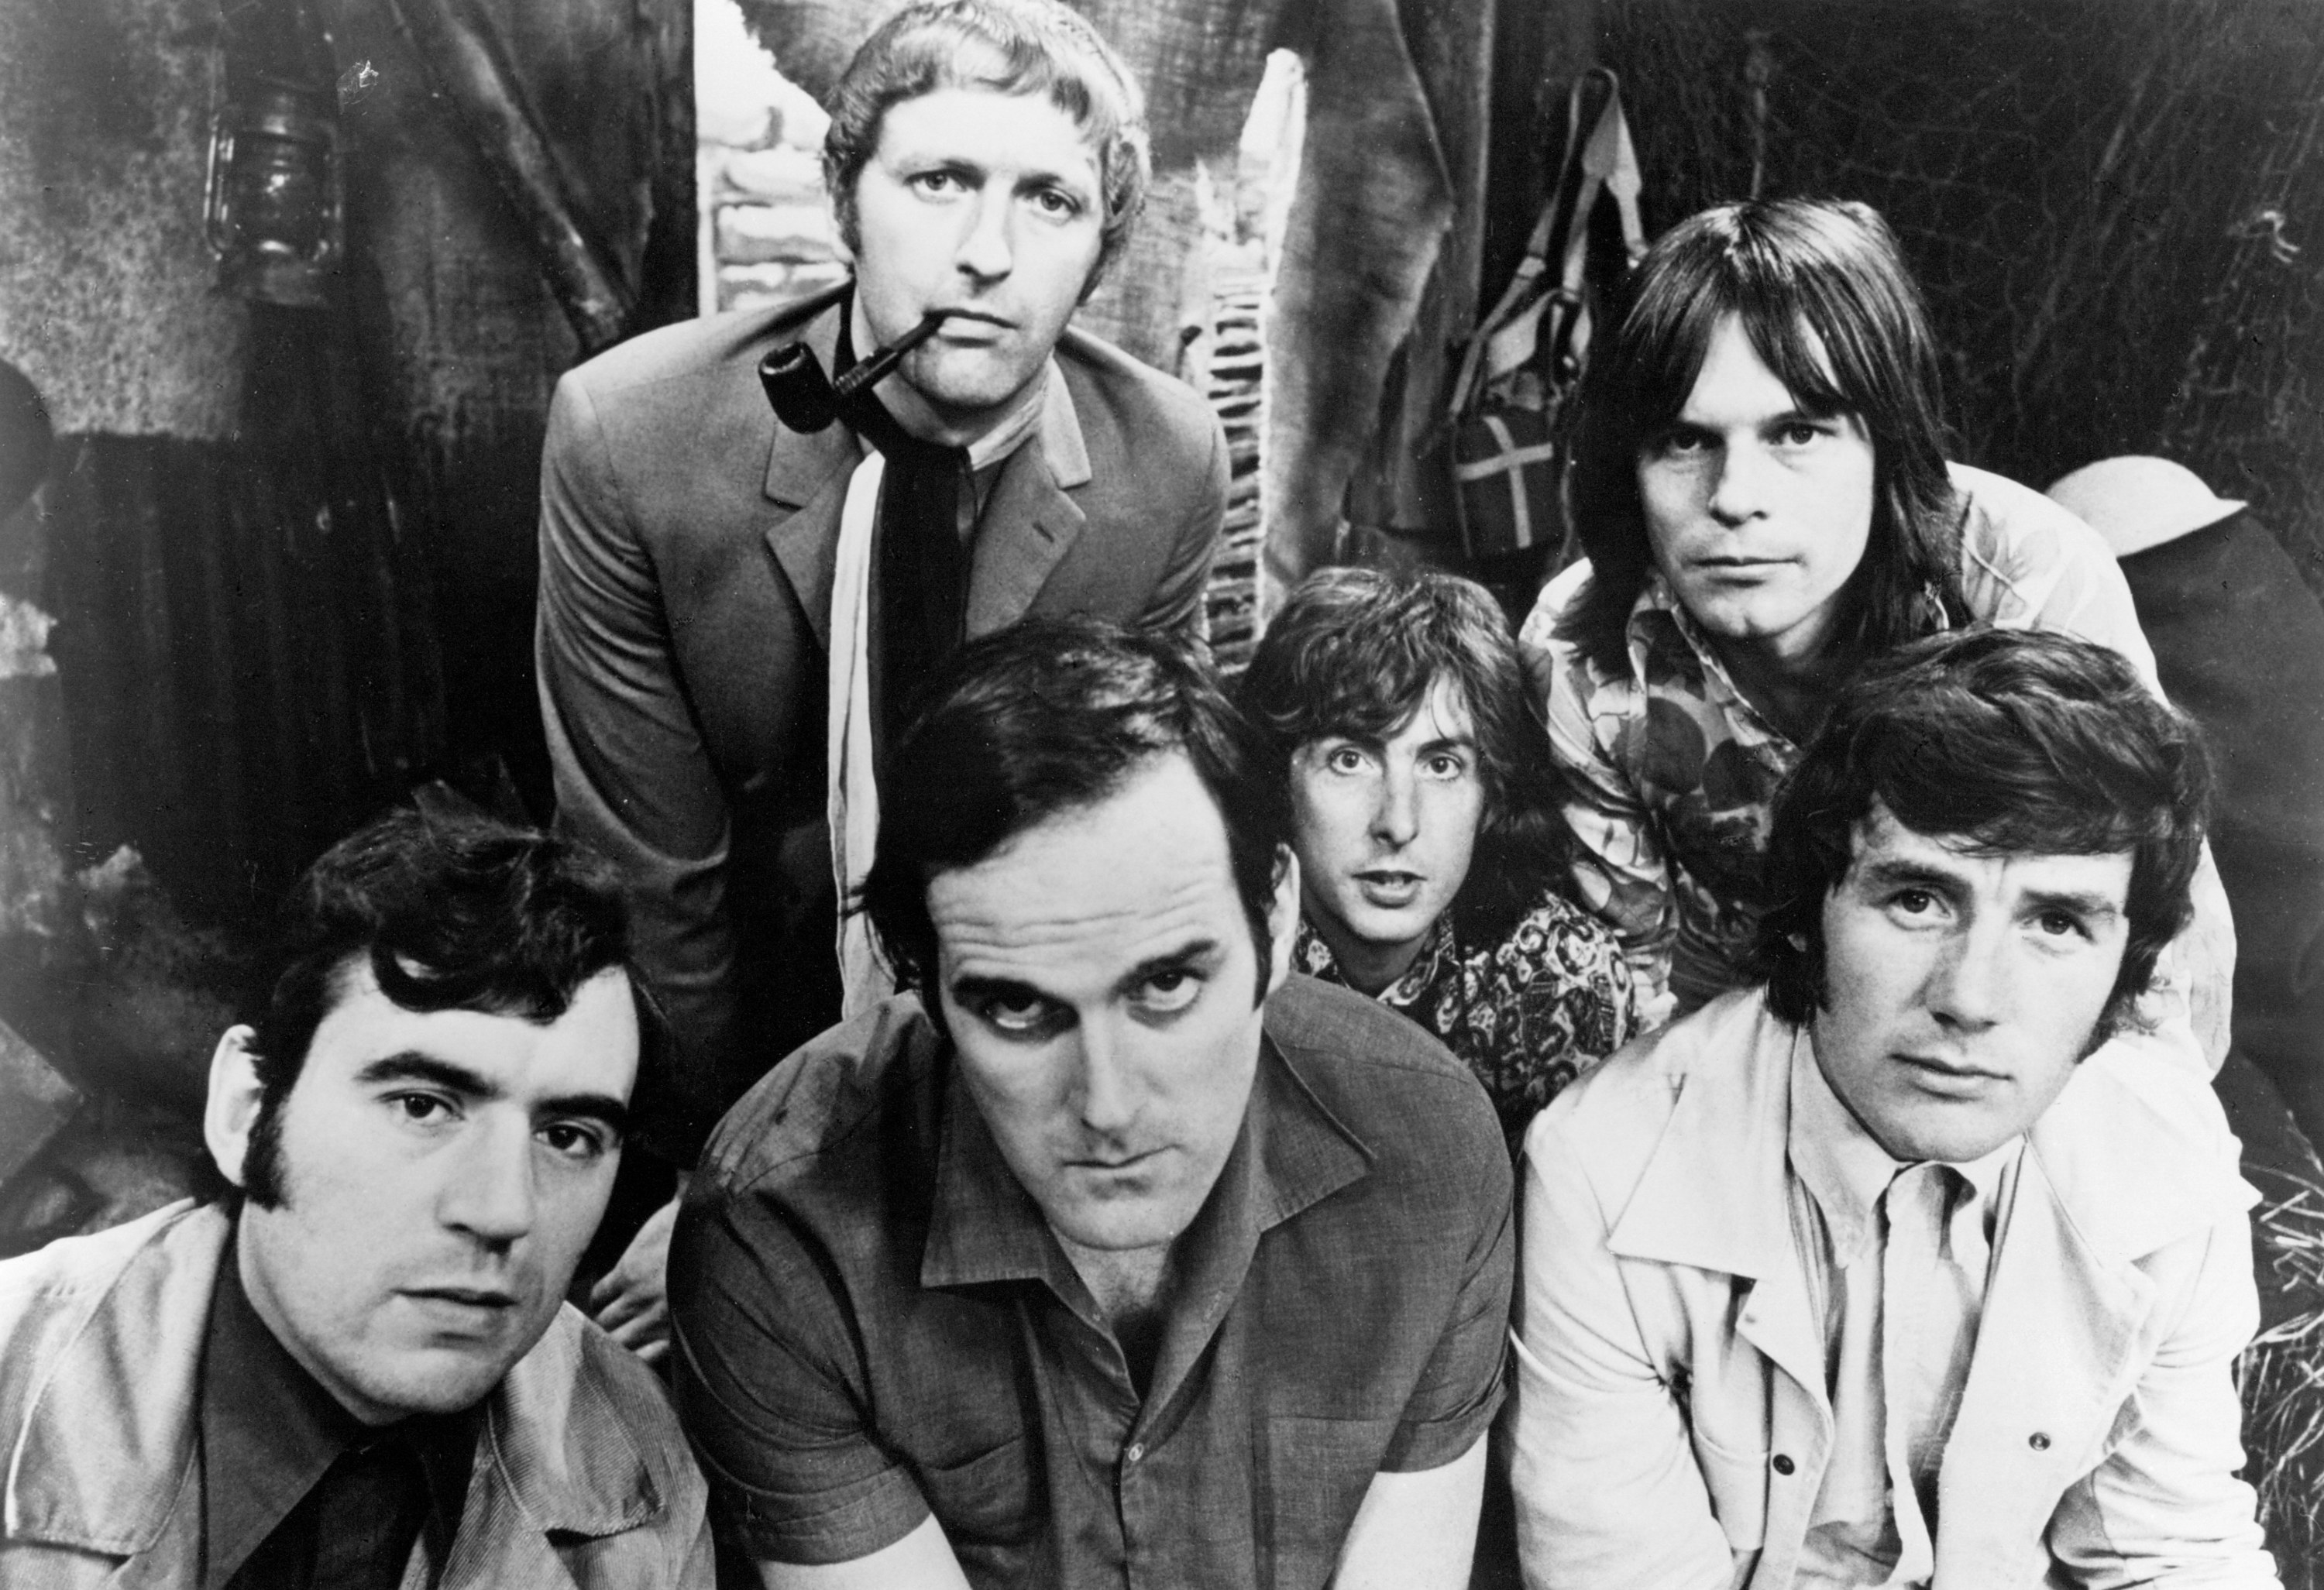 The six members of Monty Python together